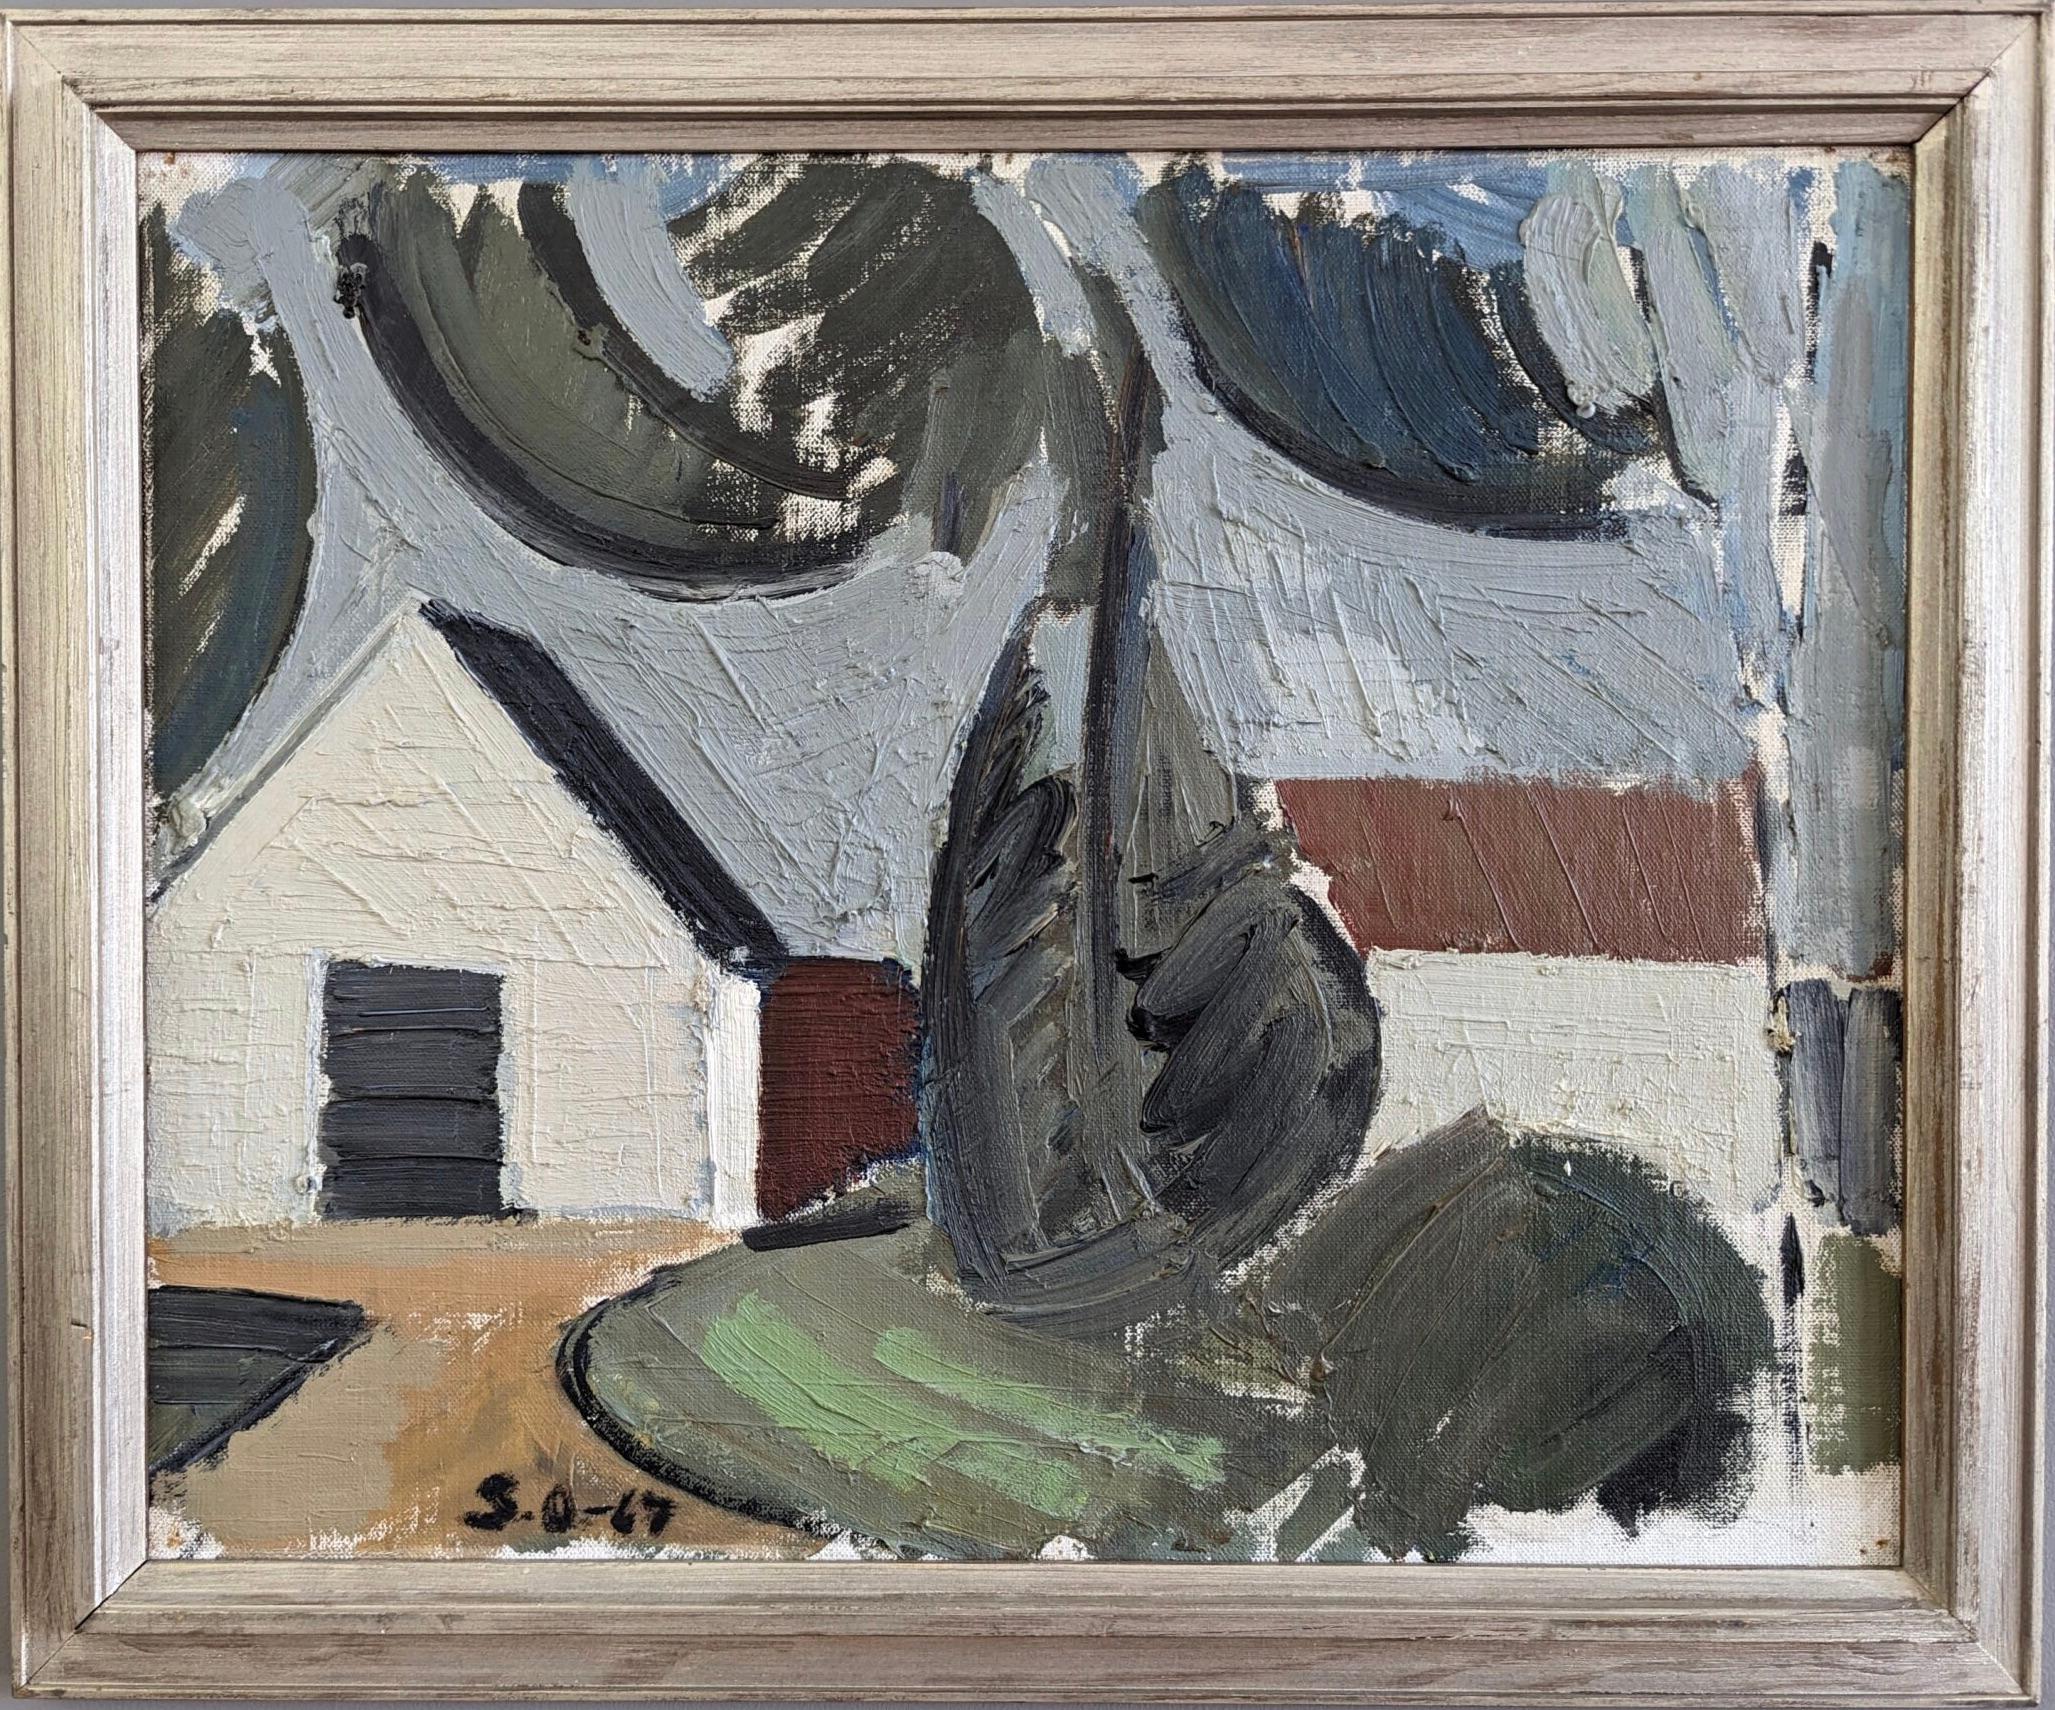 Unknown Landscape Painting - 1967 Vintage Mid-Century Swedish Landscape Oil Painting - House by the Tree